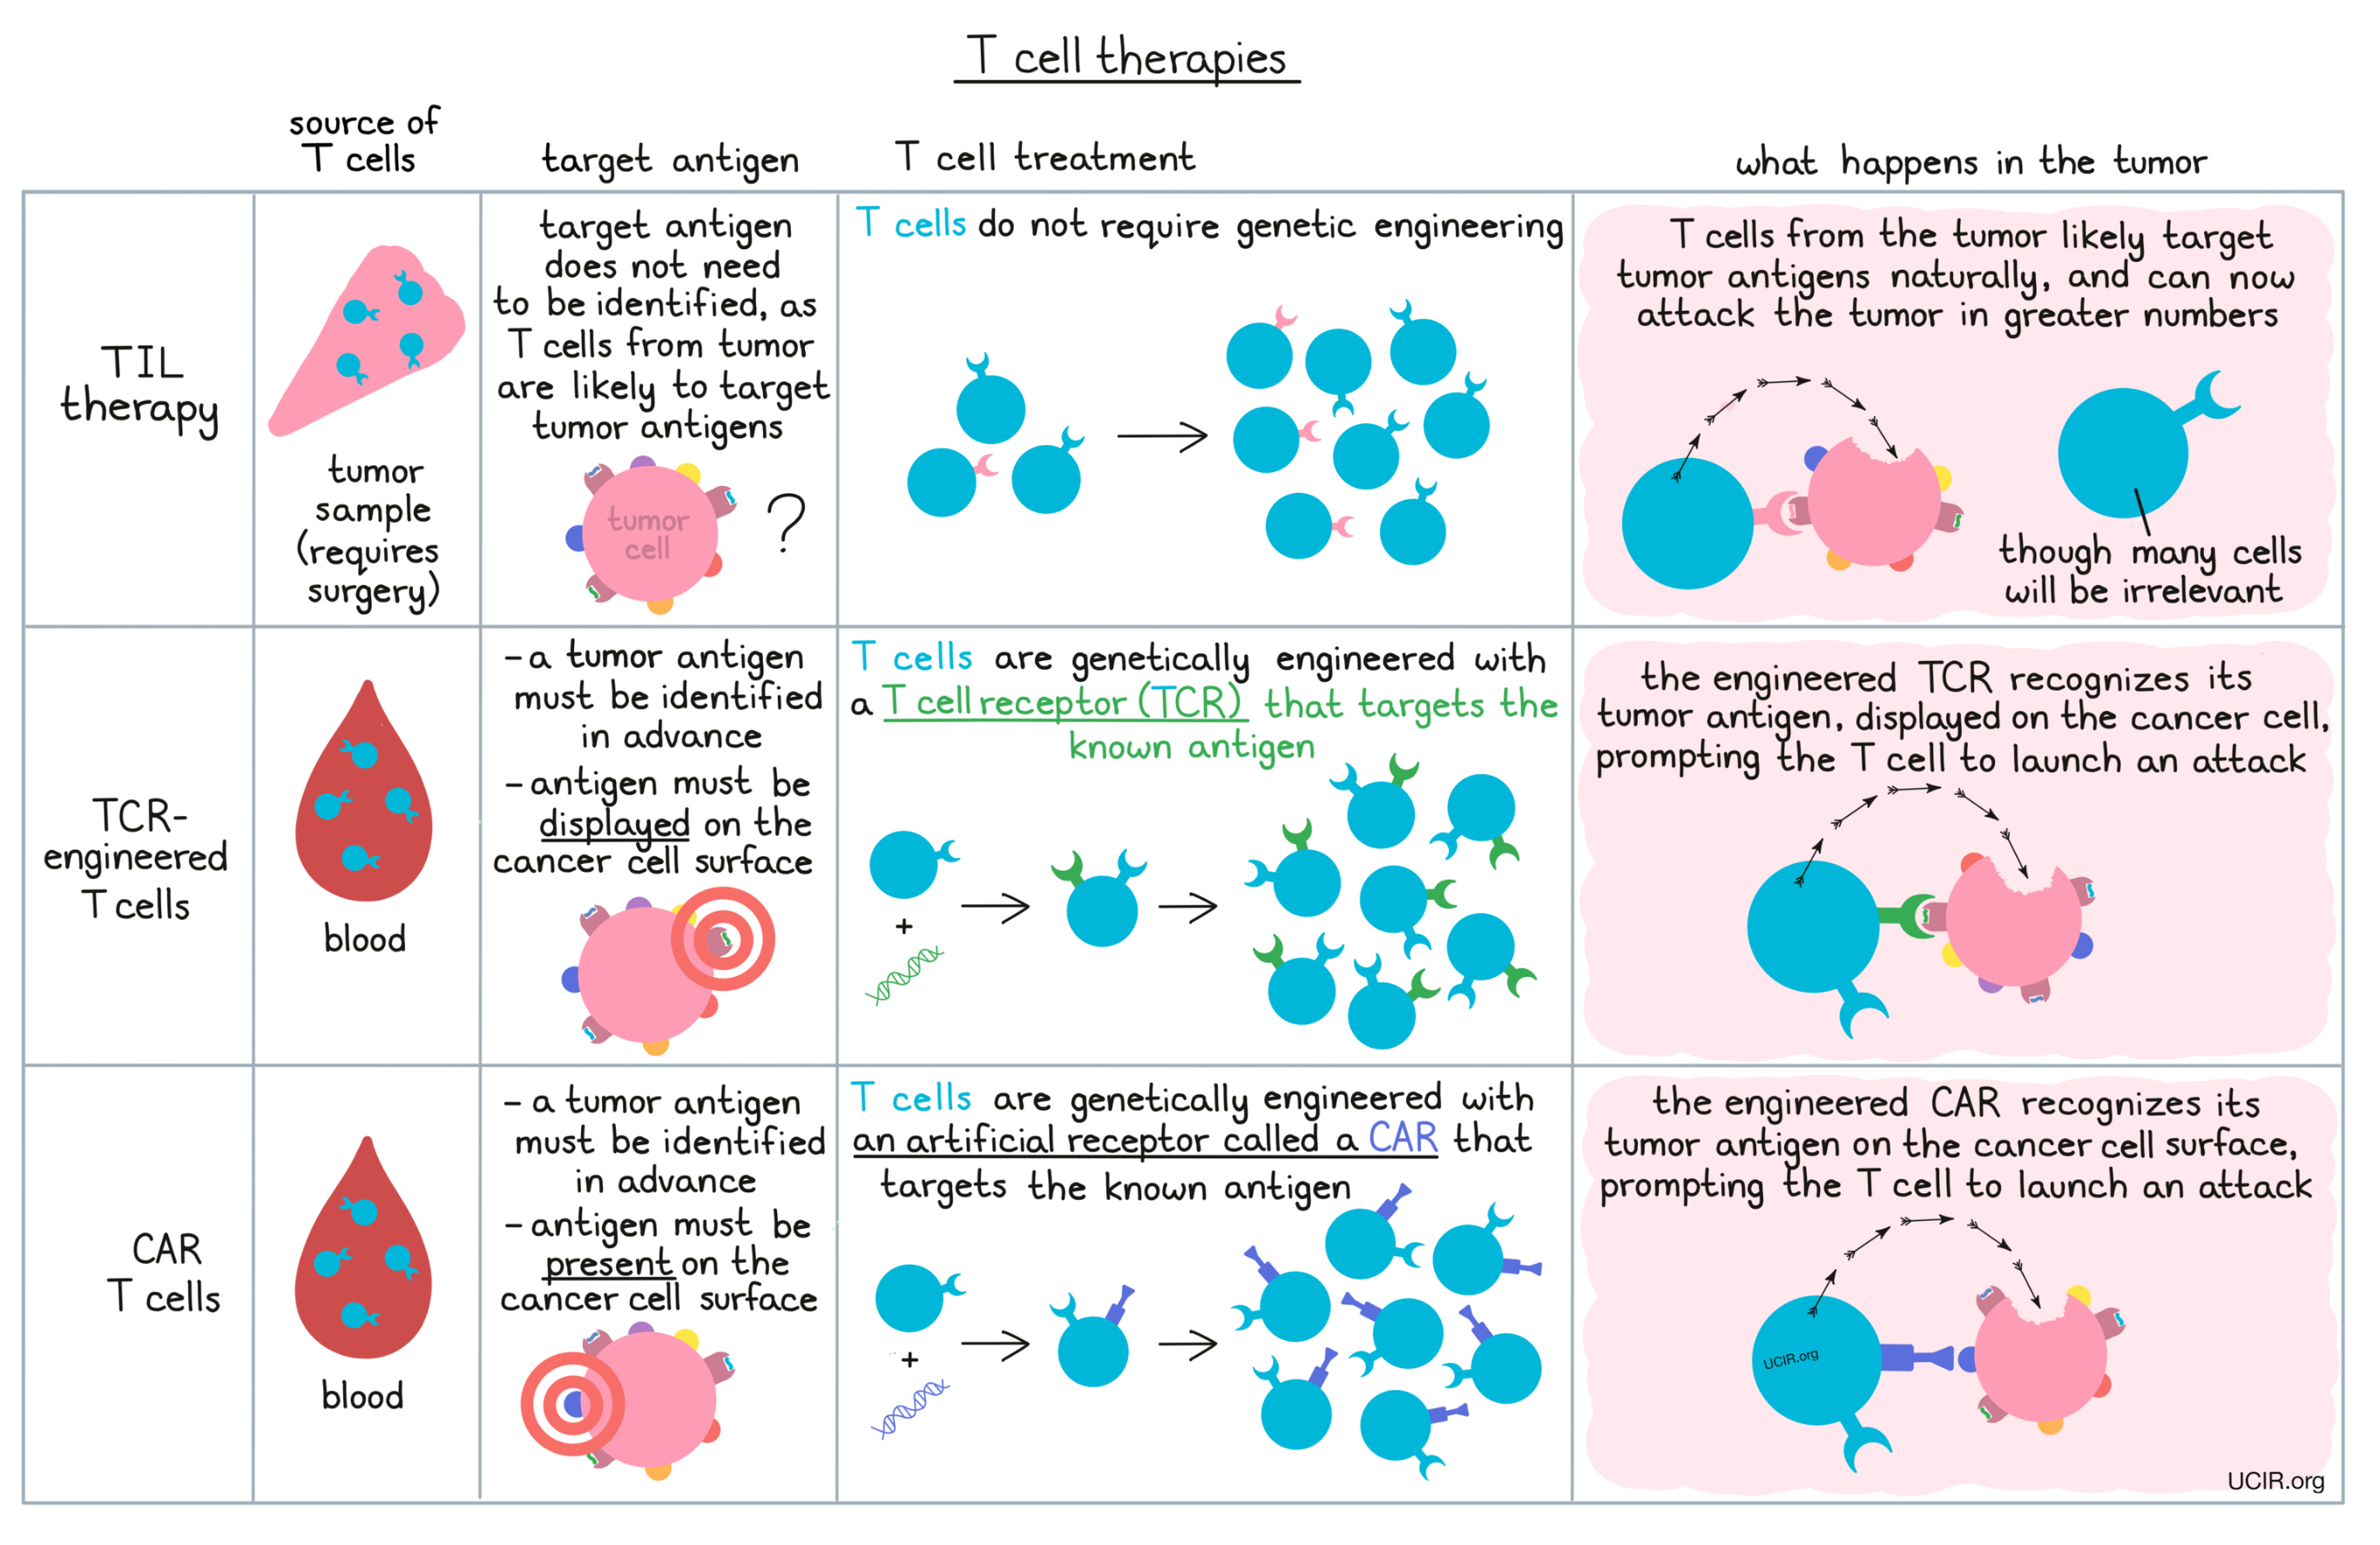 Comparing T cell therapies